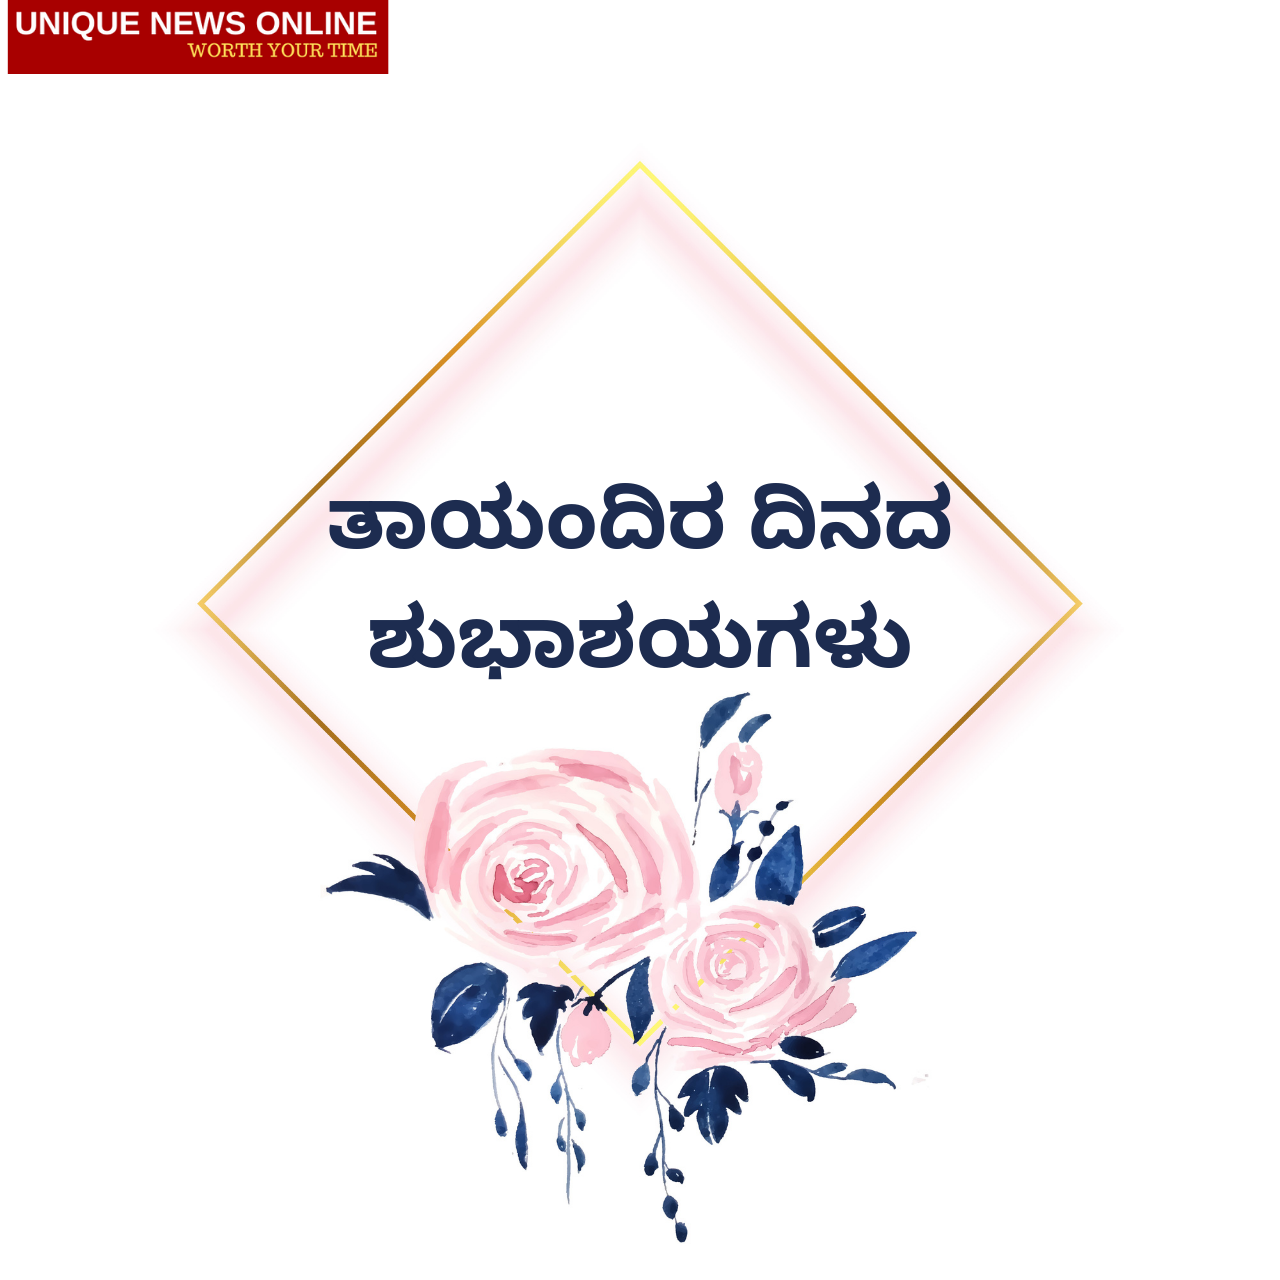 Mother's Day 2021 wishes in Bengali and Kannada, Images (Photos), Greetings, Messages, and Quotes to share with Mom